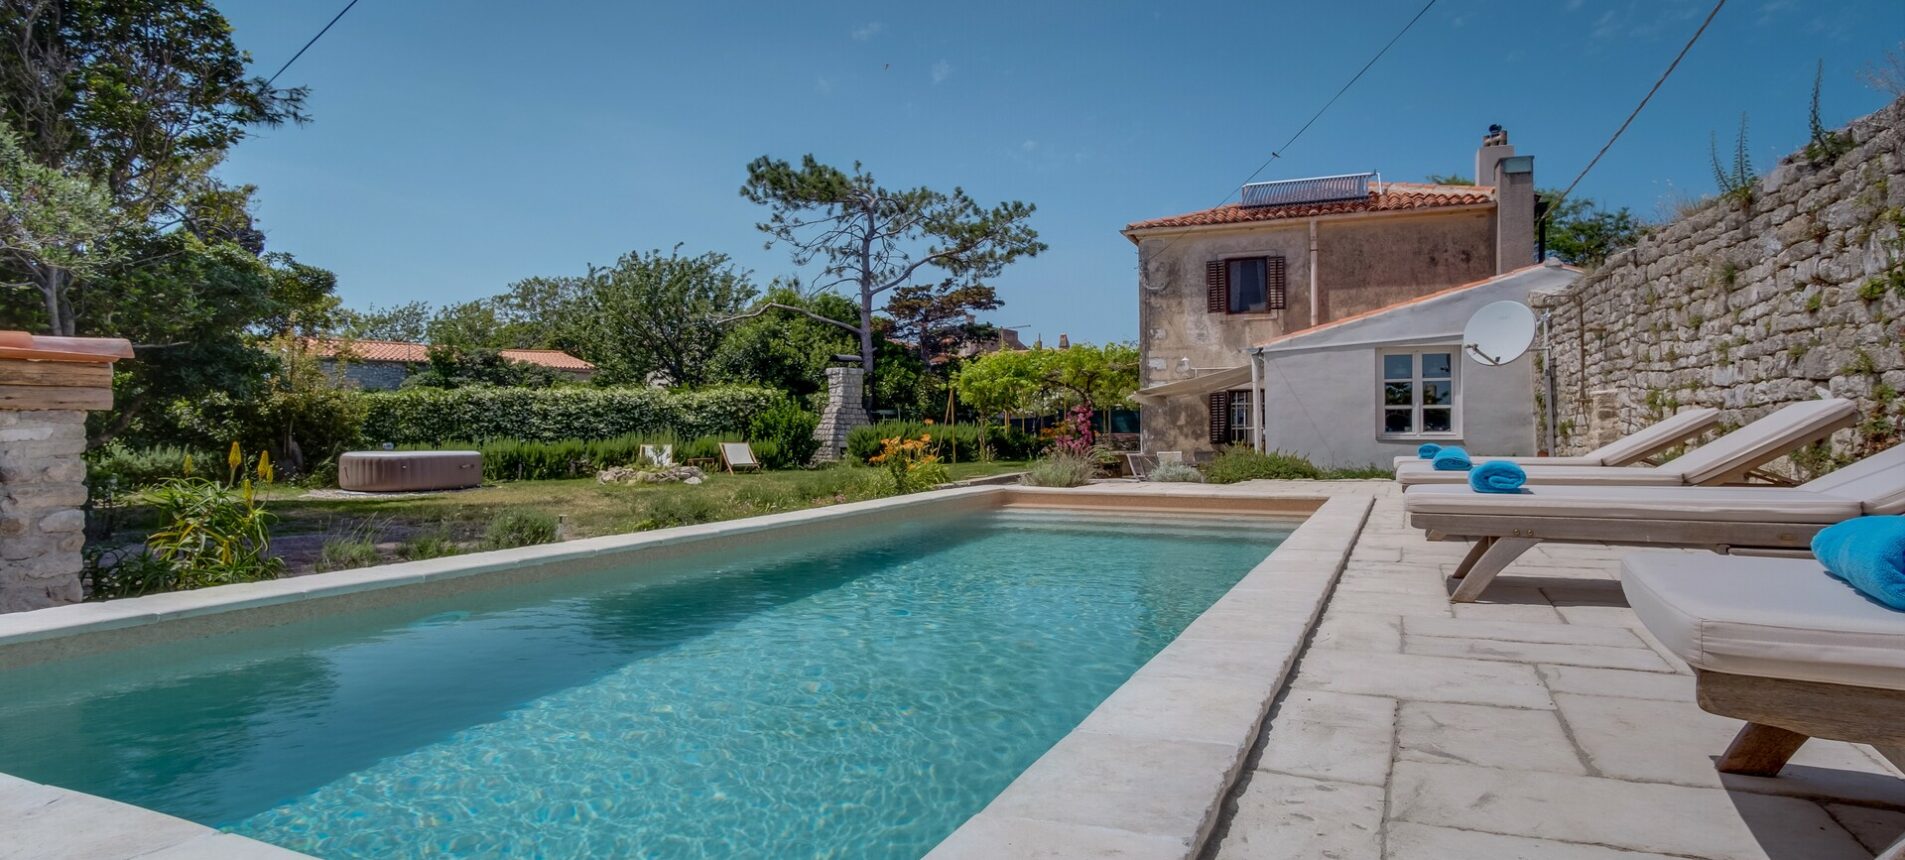 Traditional Villa Antiqua with heated pool